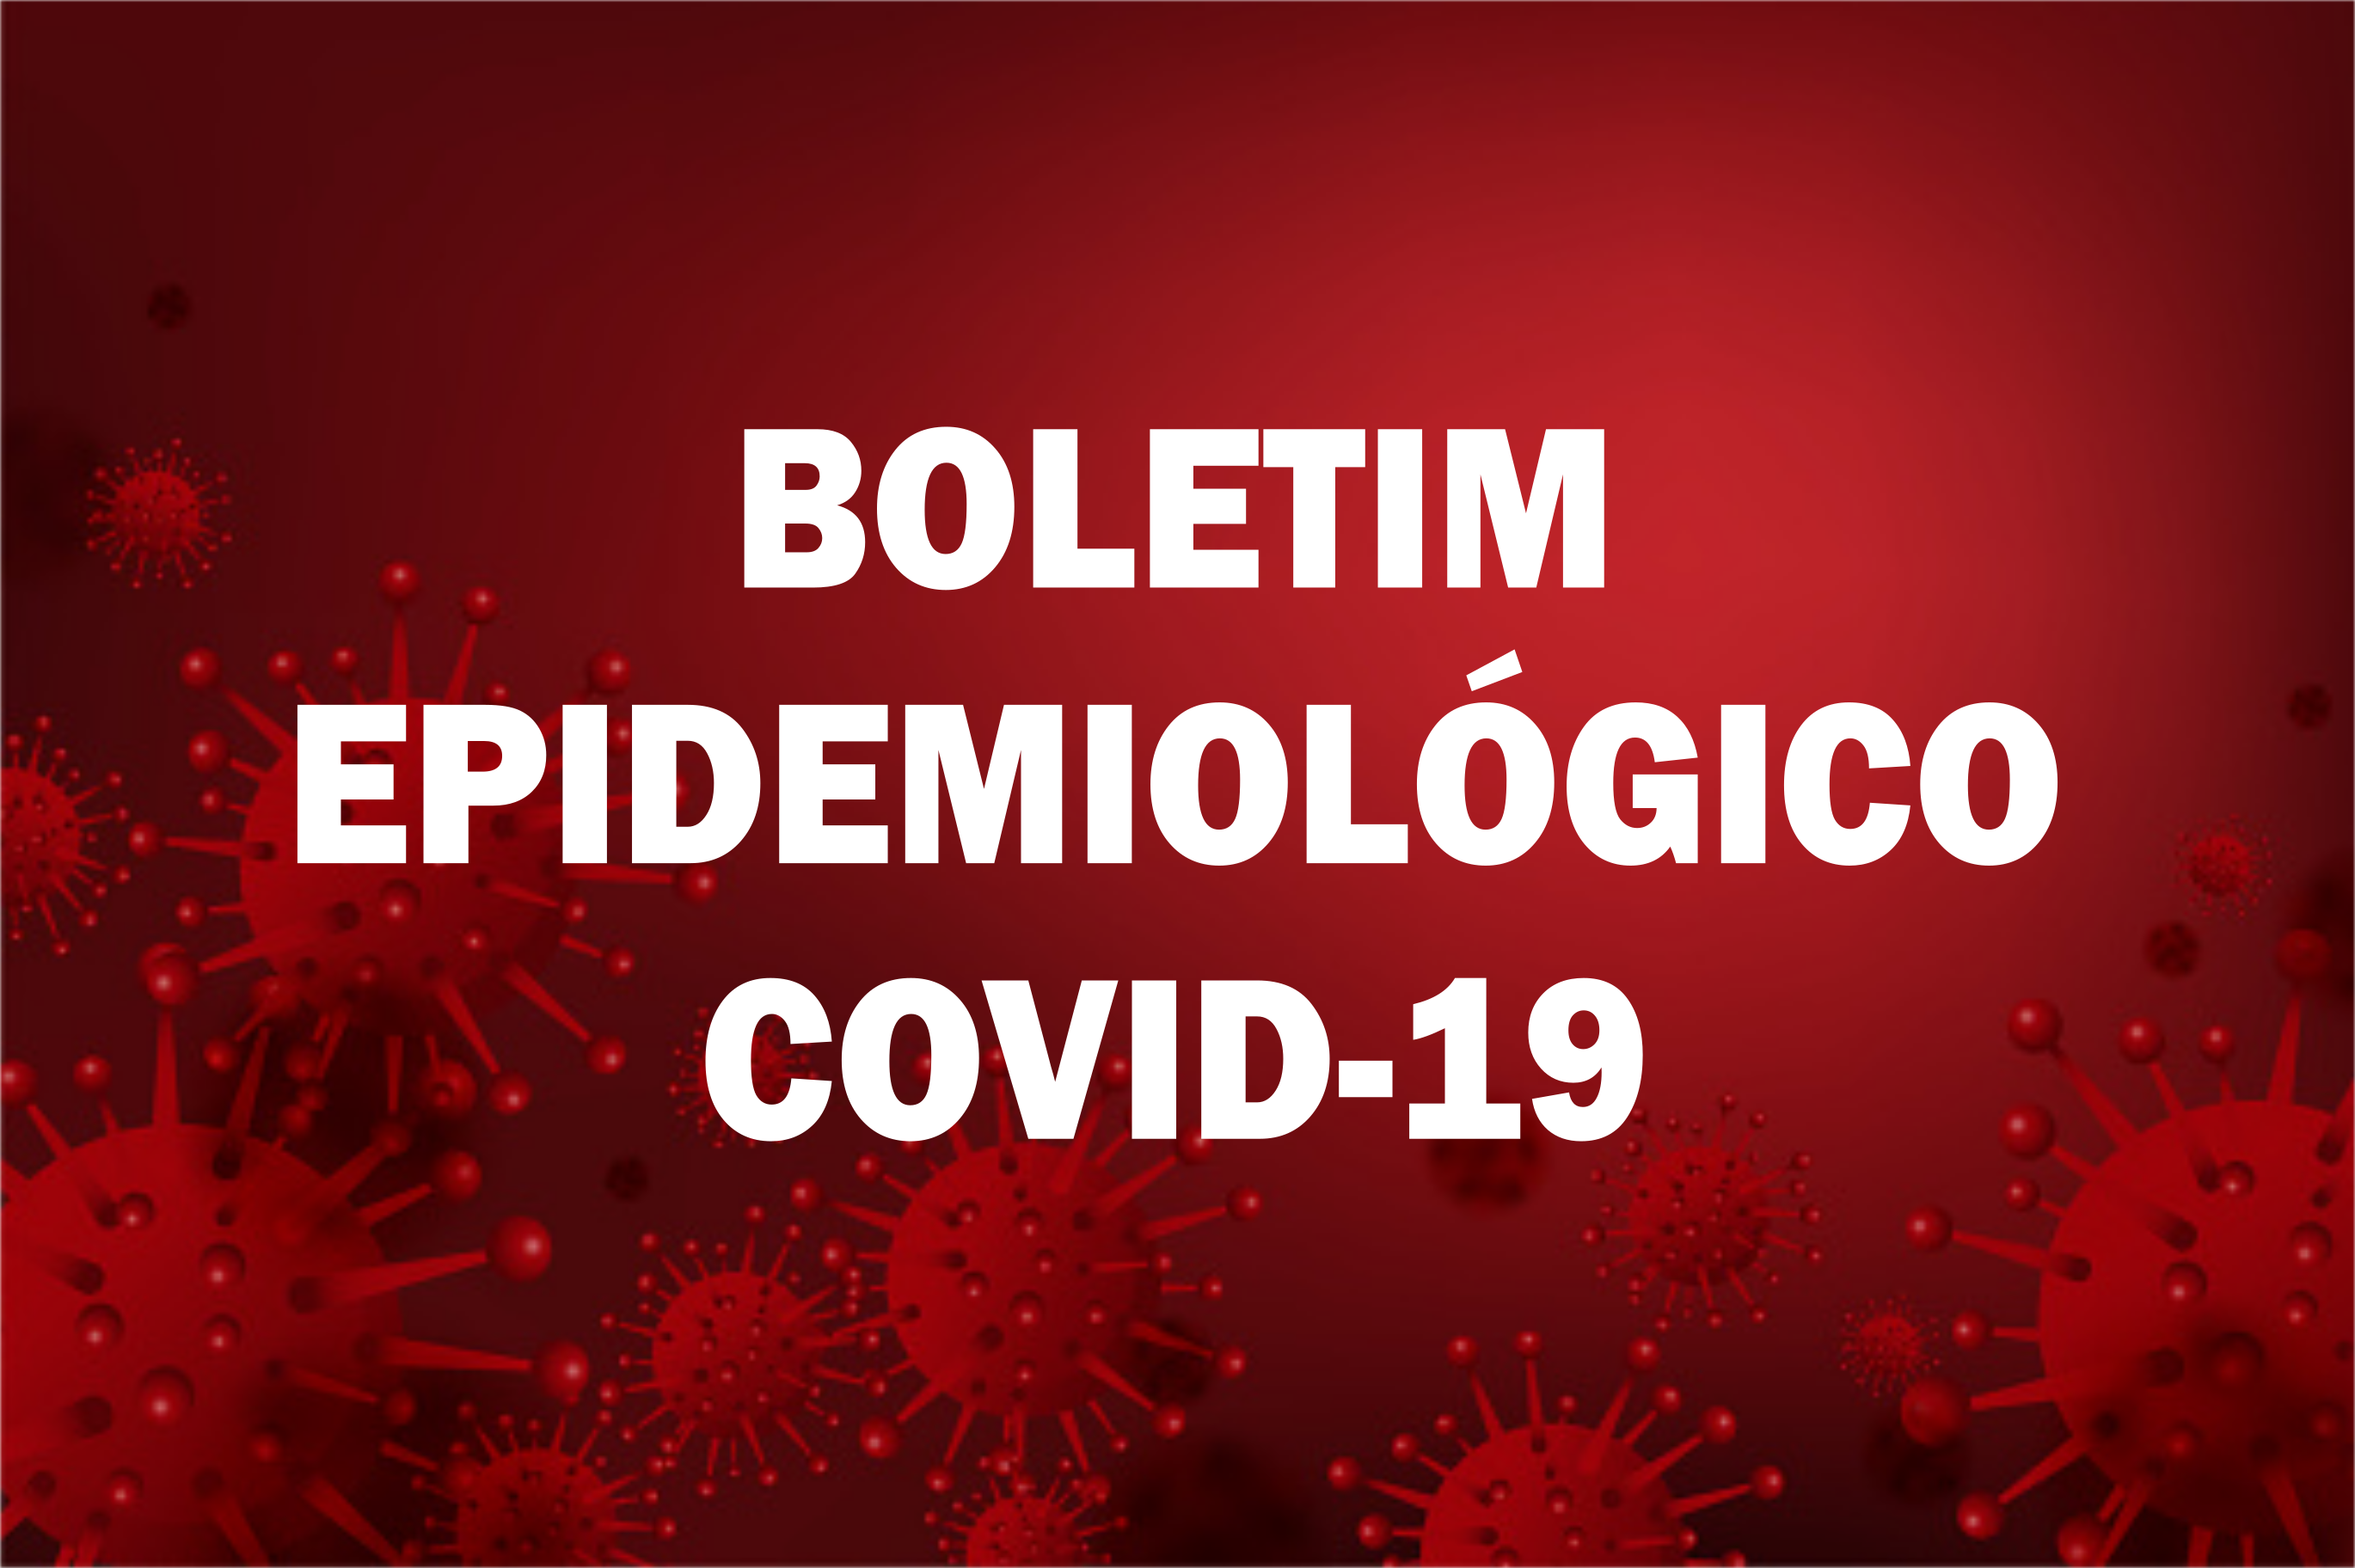 You are currently viewing BOLETIM EPIDEMIOLÓGICO Nº 156 (COVID-19)